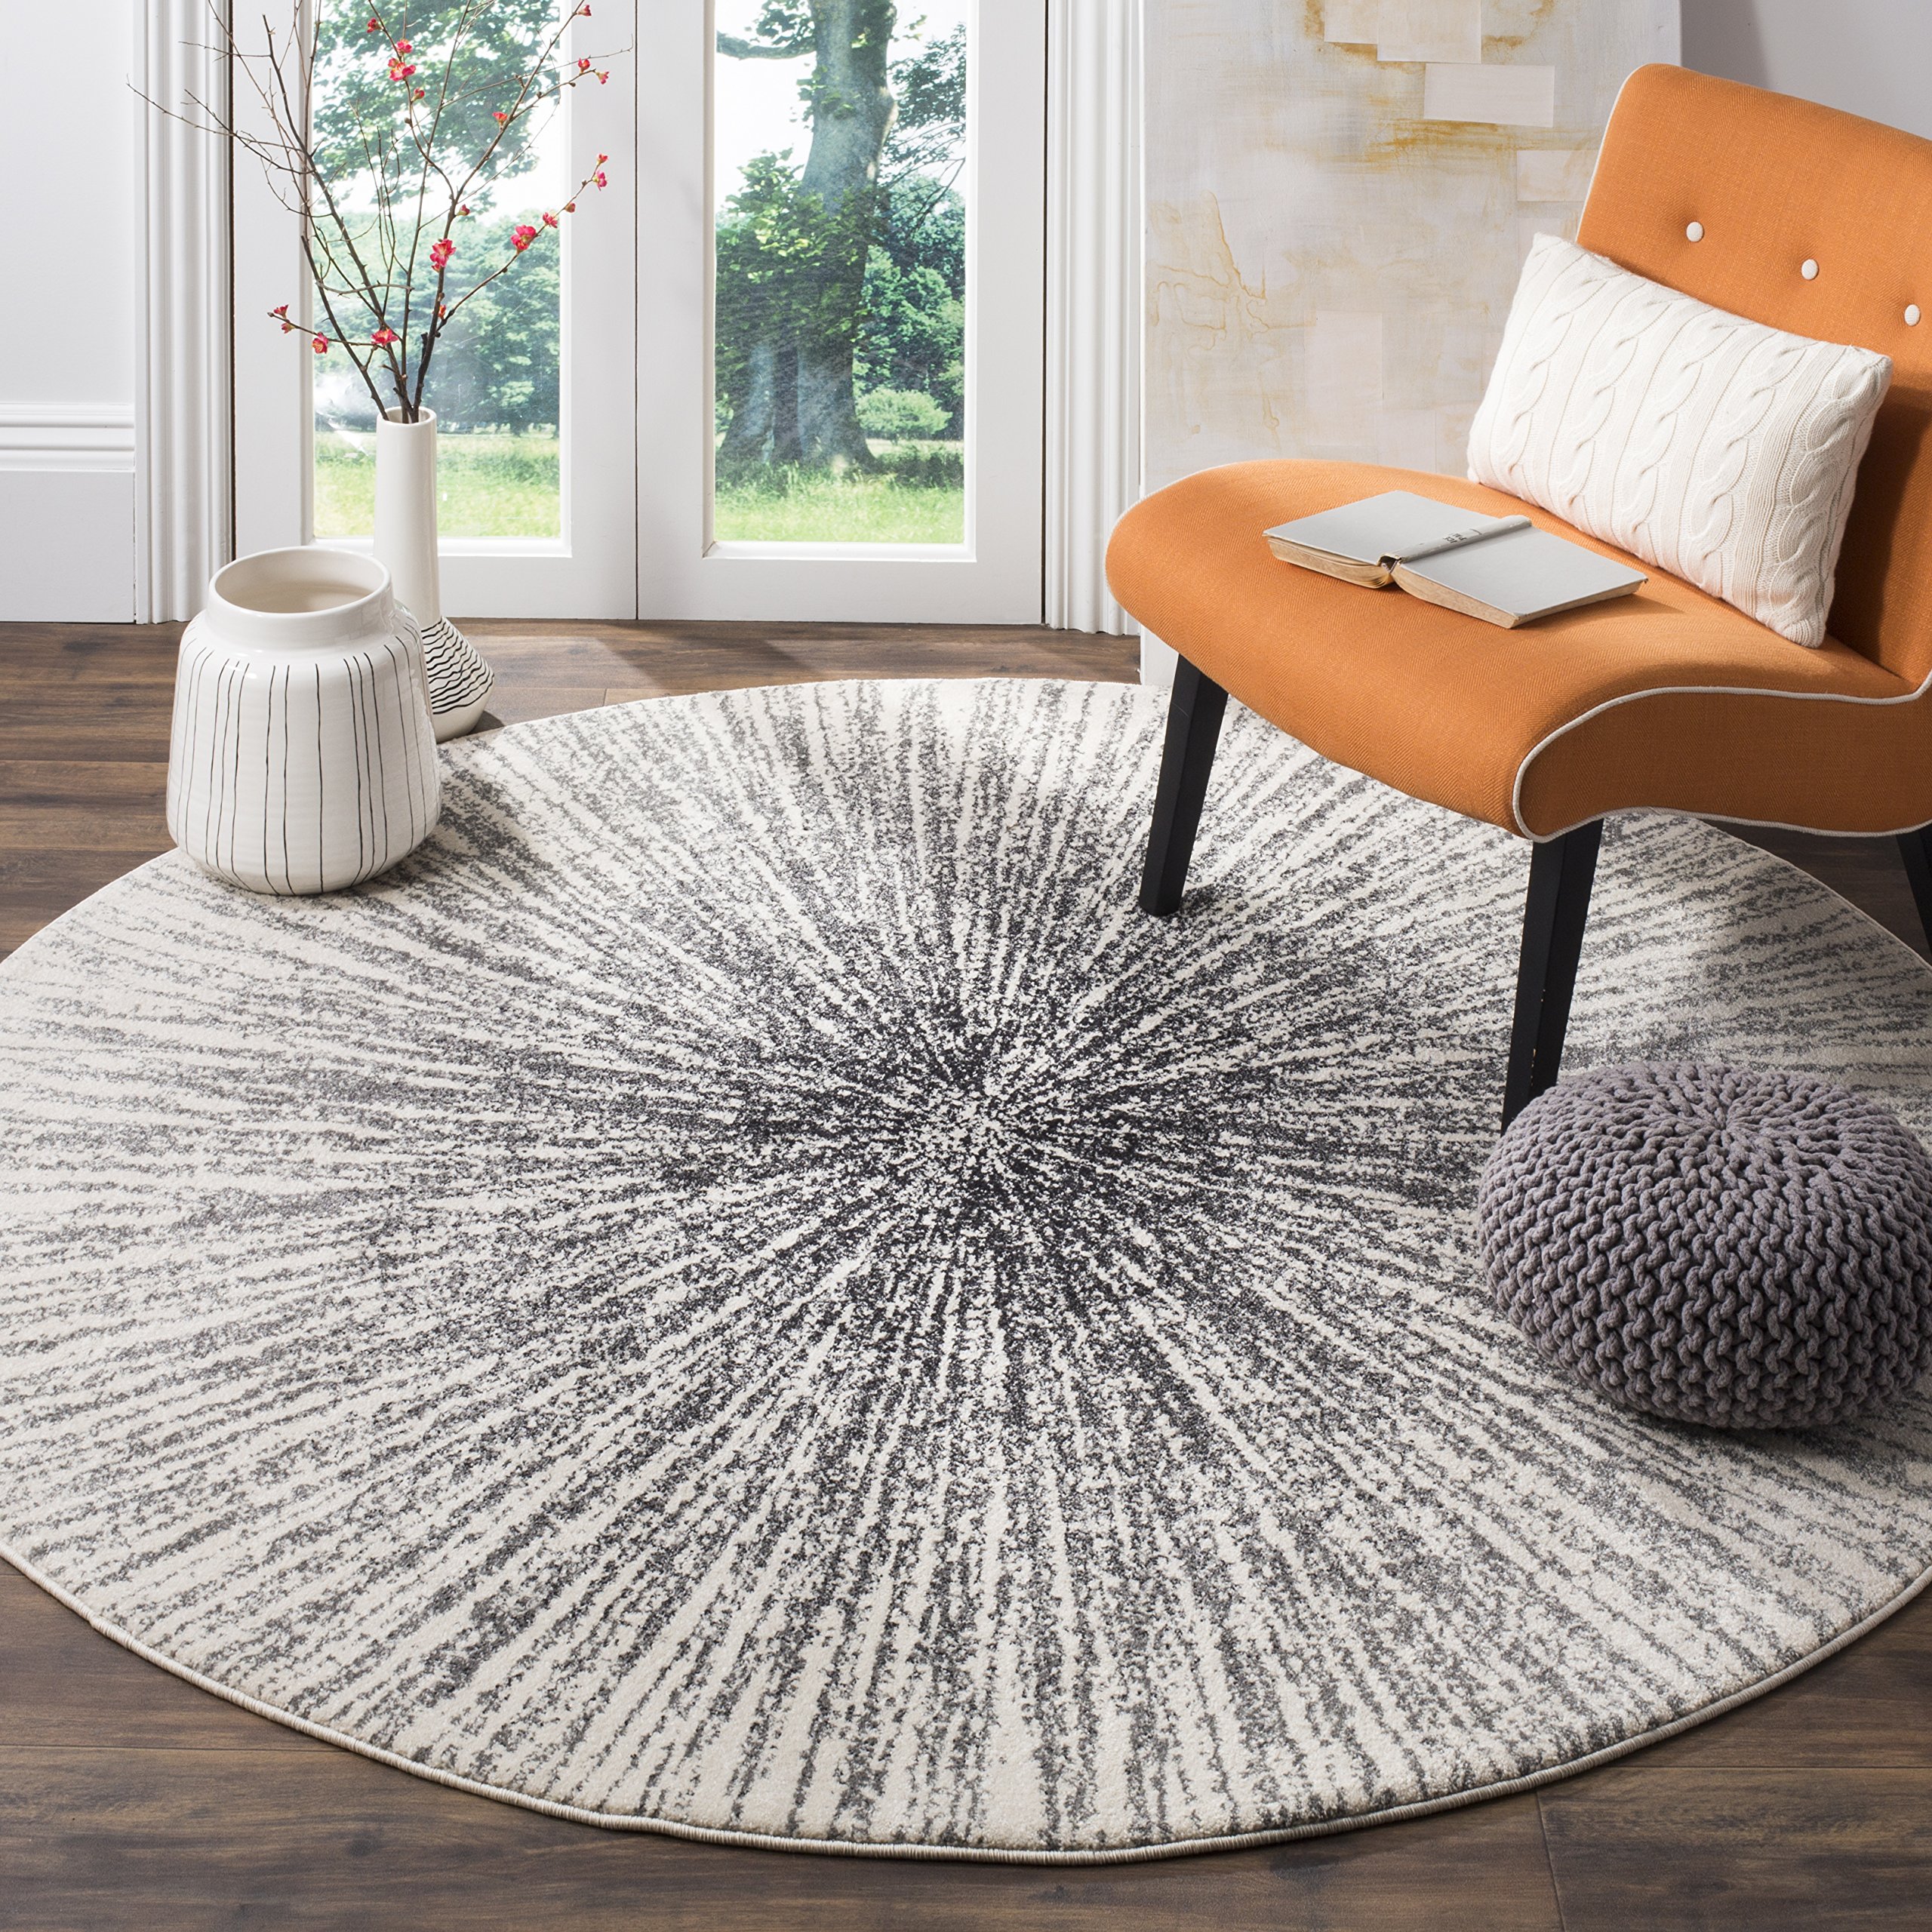 SAFAVIEH Evoke Collection 5'1" x 5'1" Round Black/Ivory EVK228K Abstract Burst Non-Shedding Dining Room Entryway Foyer Living Room ...